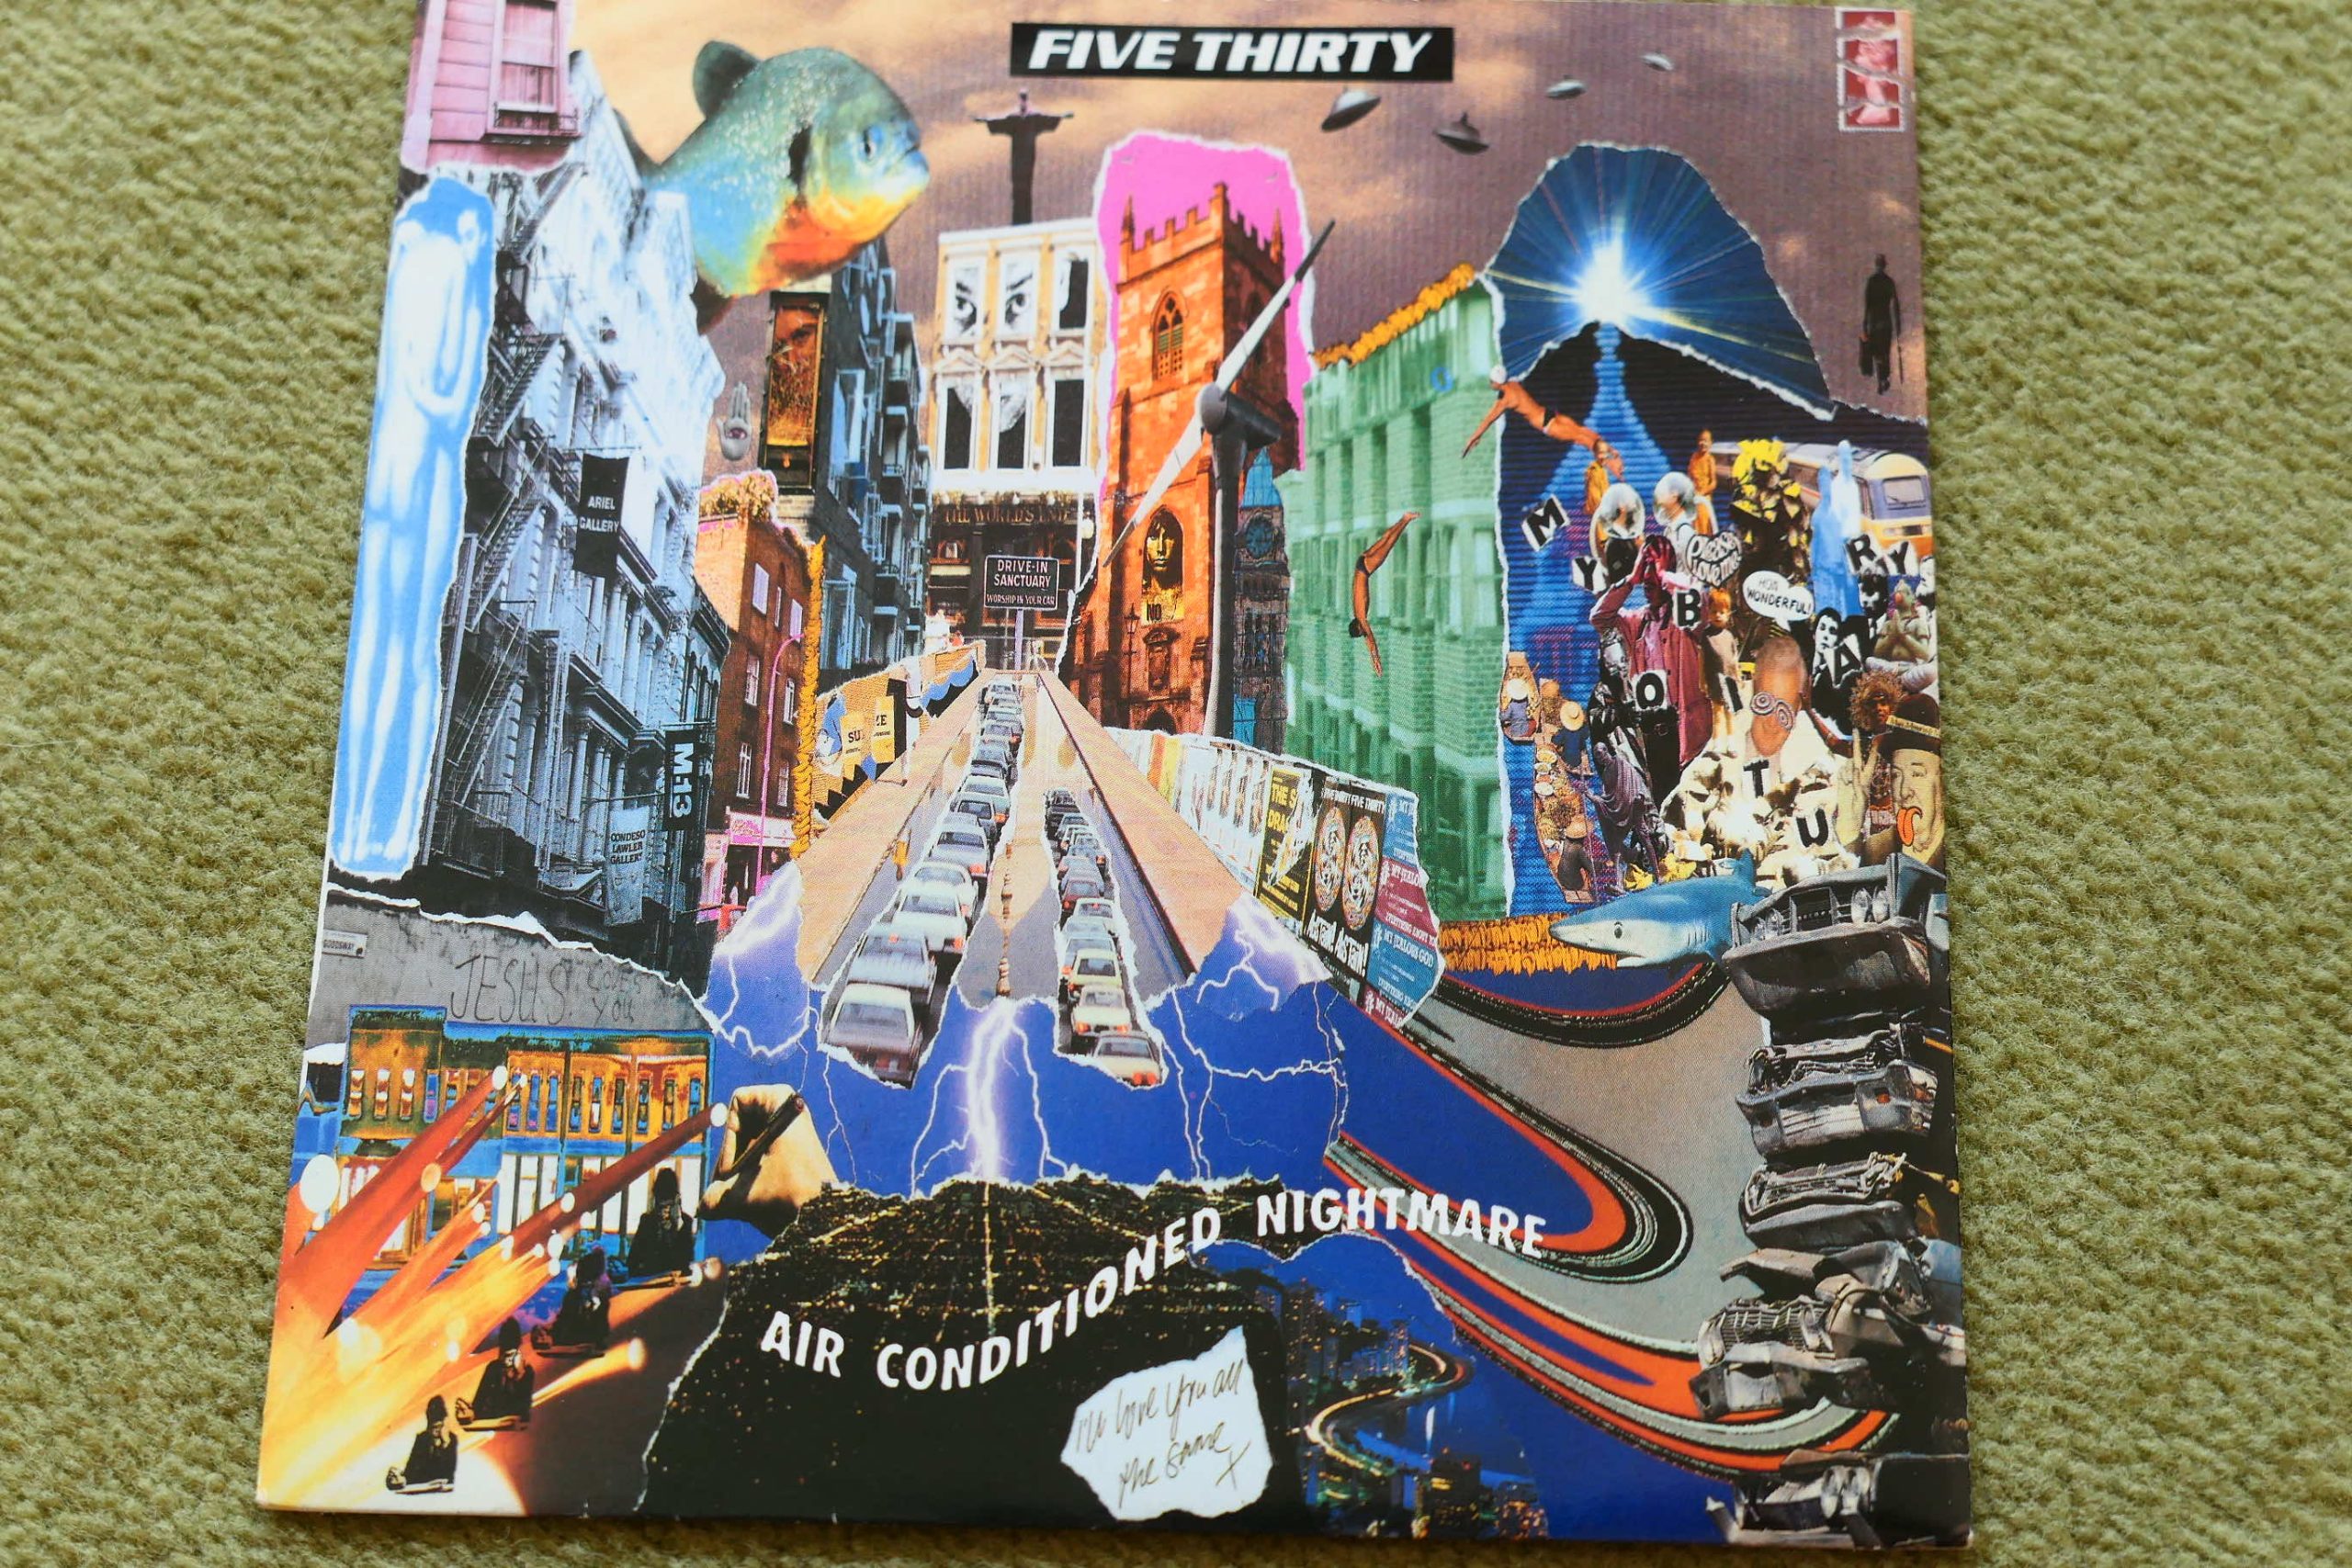 FIVE-THIRTY-AIR-CONDITIONED-NIGHTMARE-7-VINYL-SINGLE-RECORD